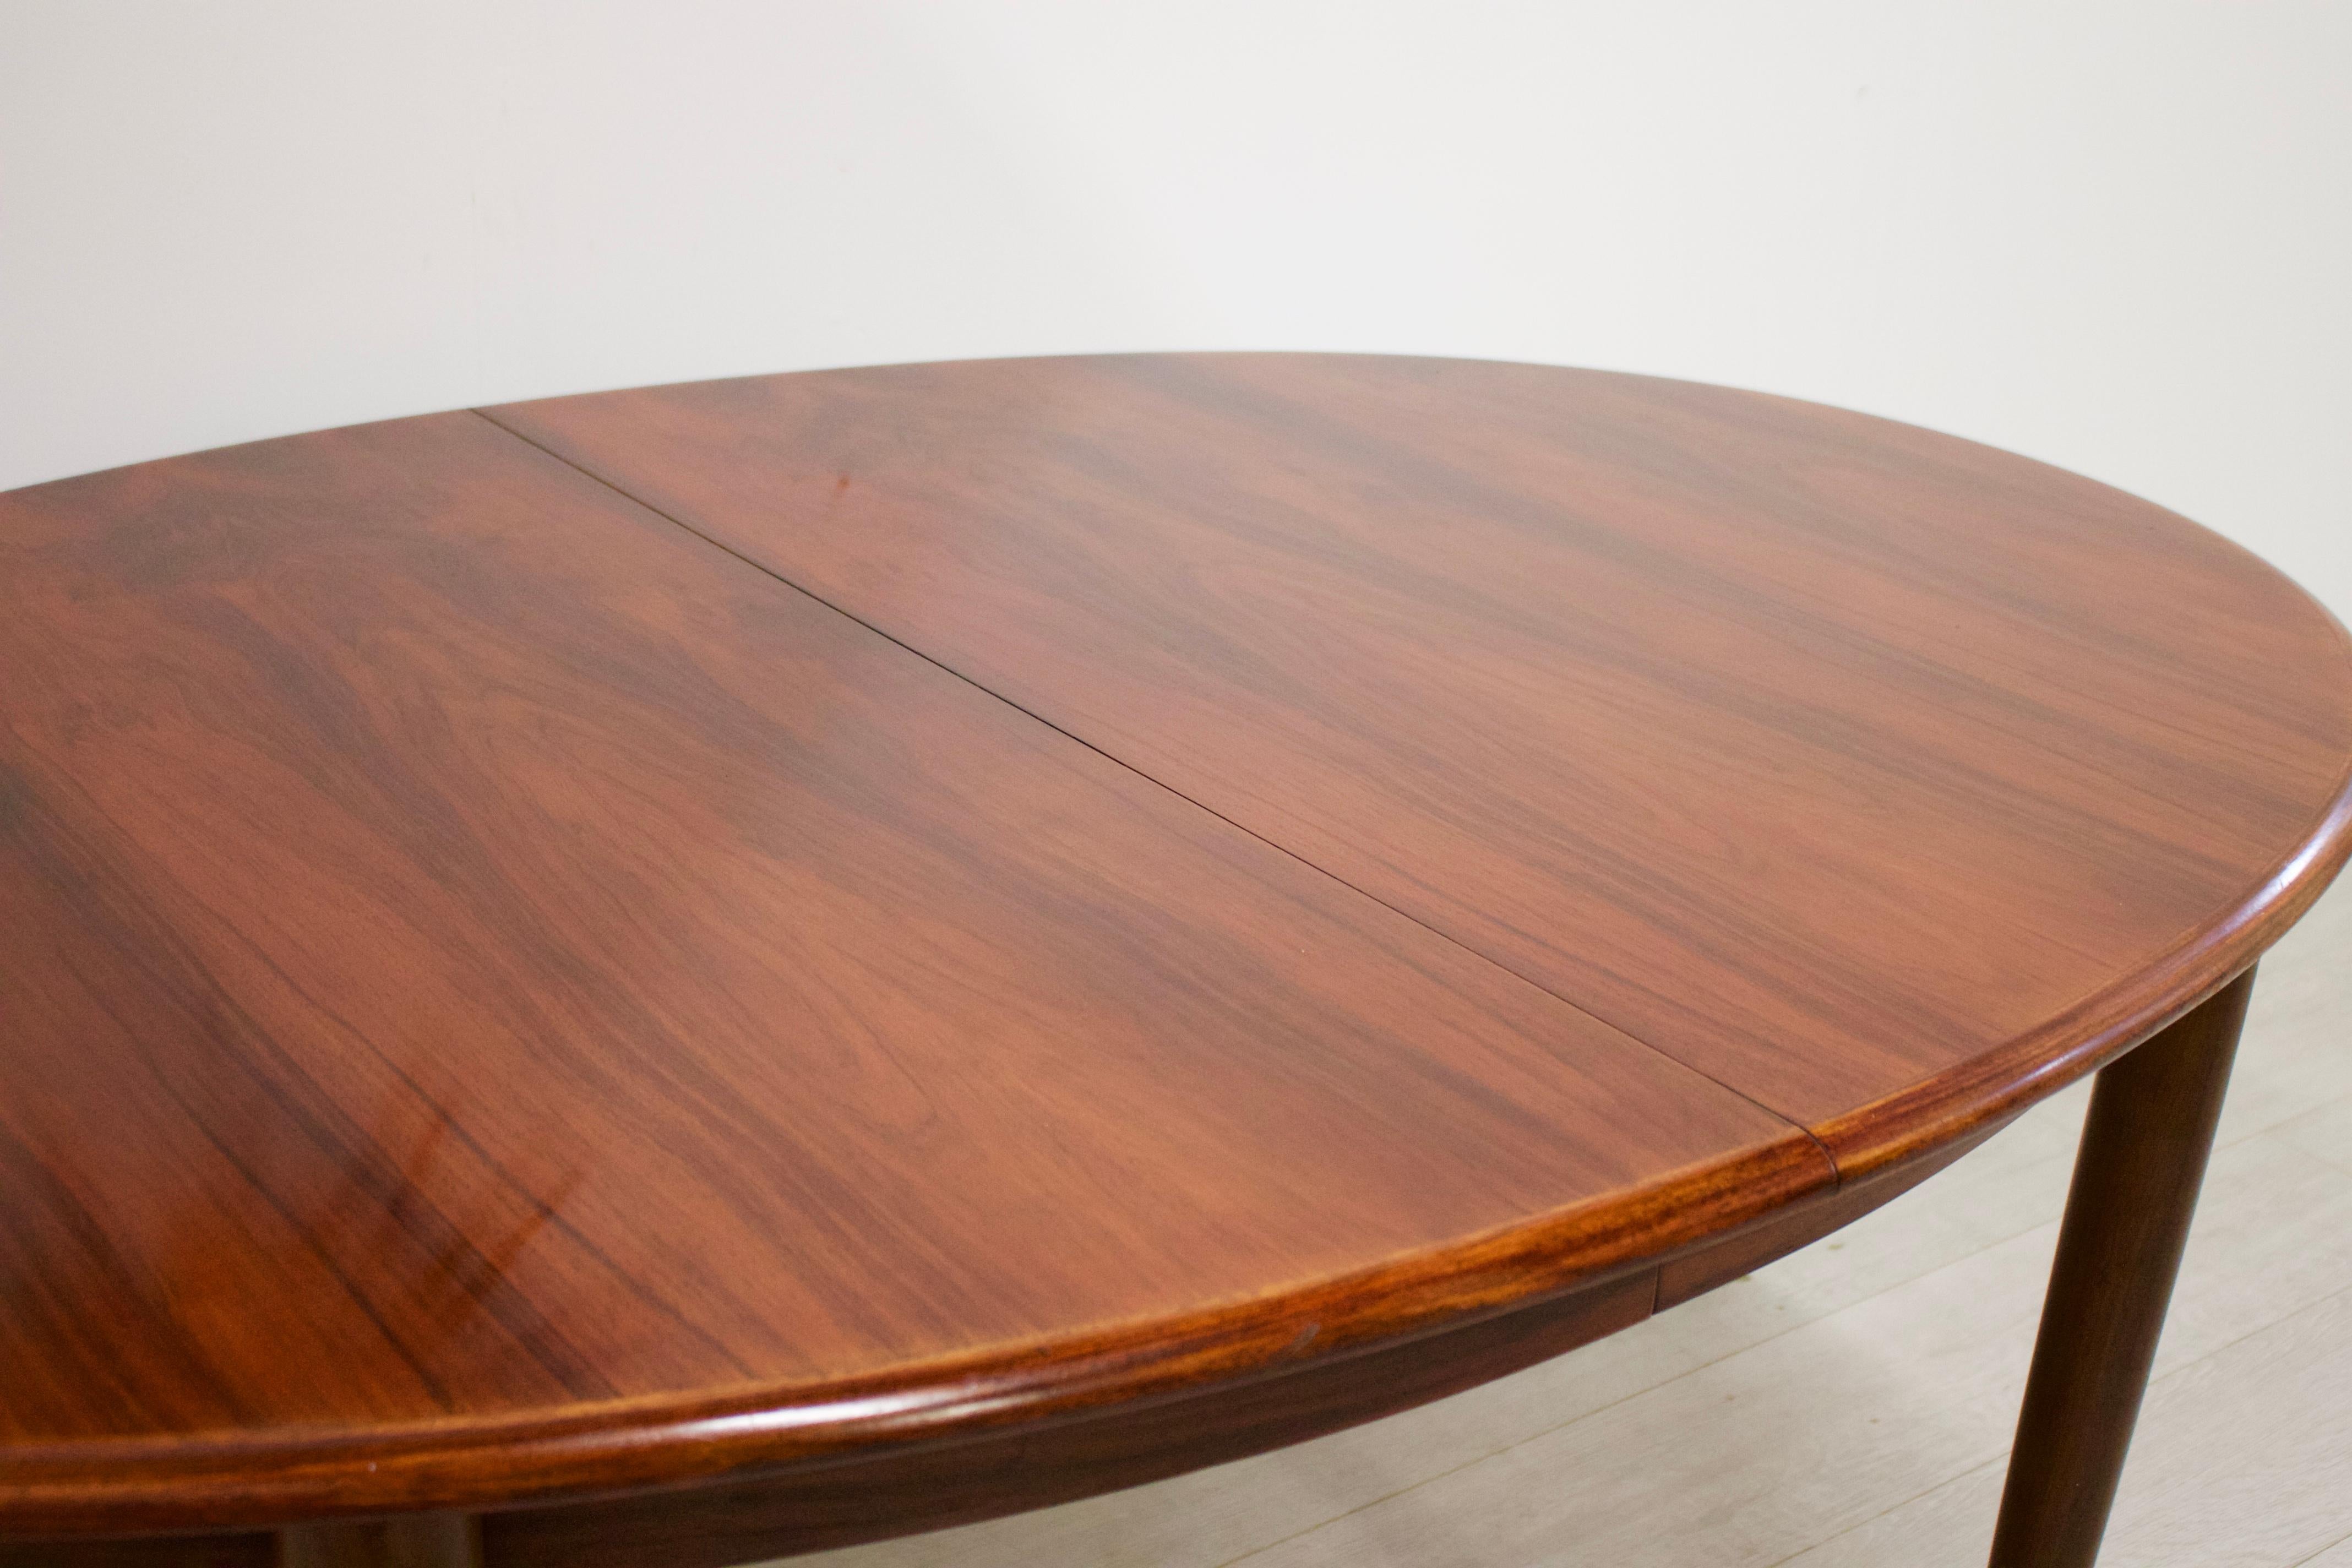 Midcentury Danish Rosewood Extending Table by Gudme Møbelfabrik In Good Condition For Sale In South Shields, Tyne and Wear